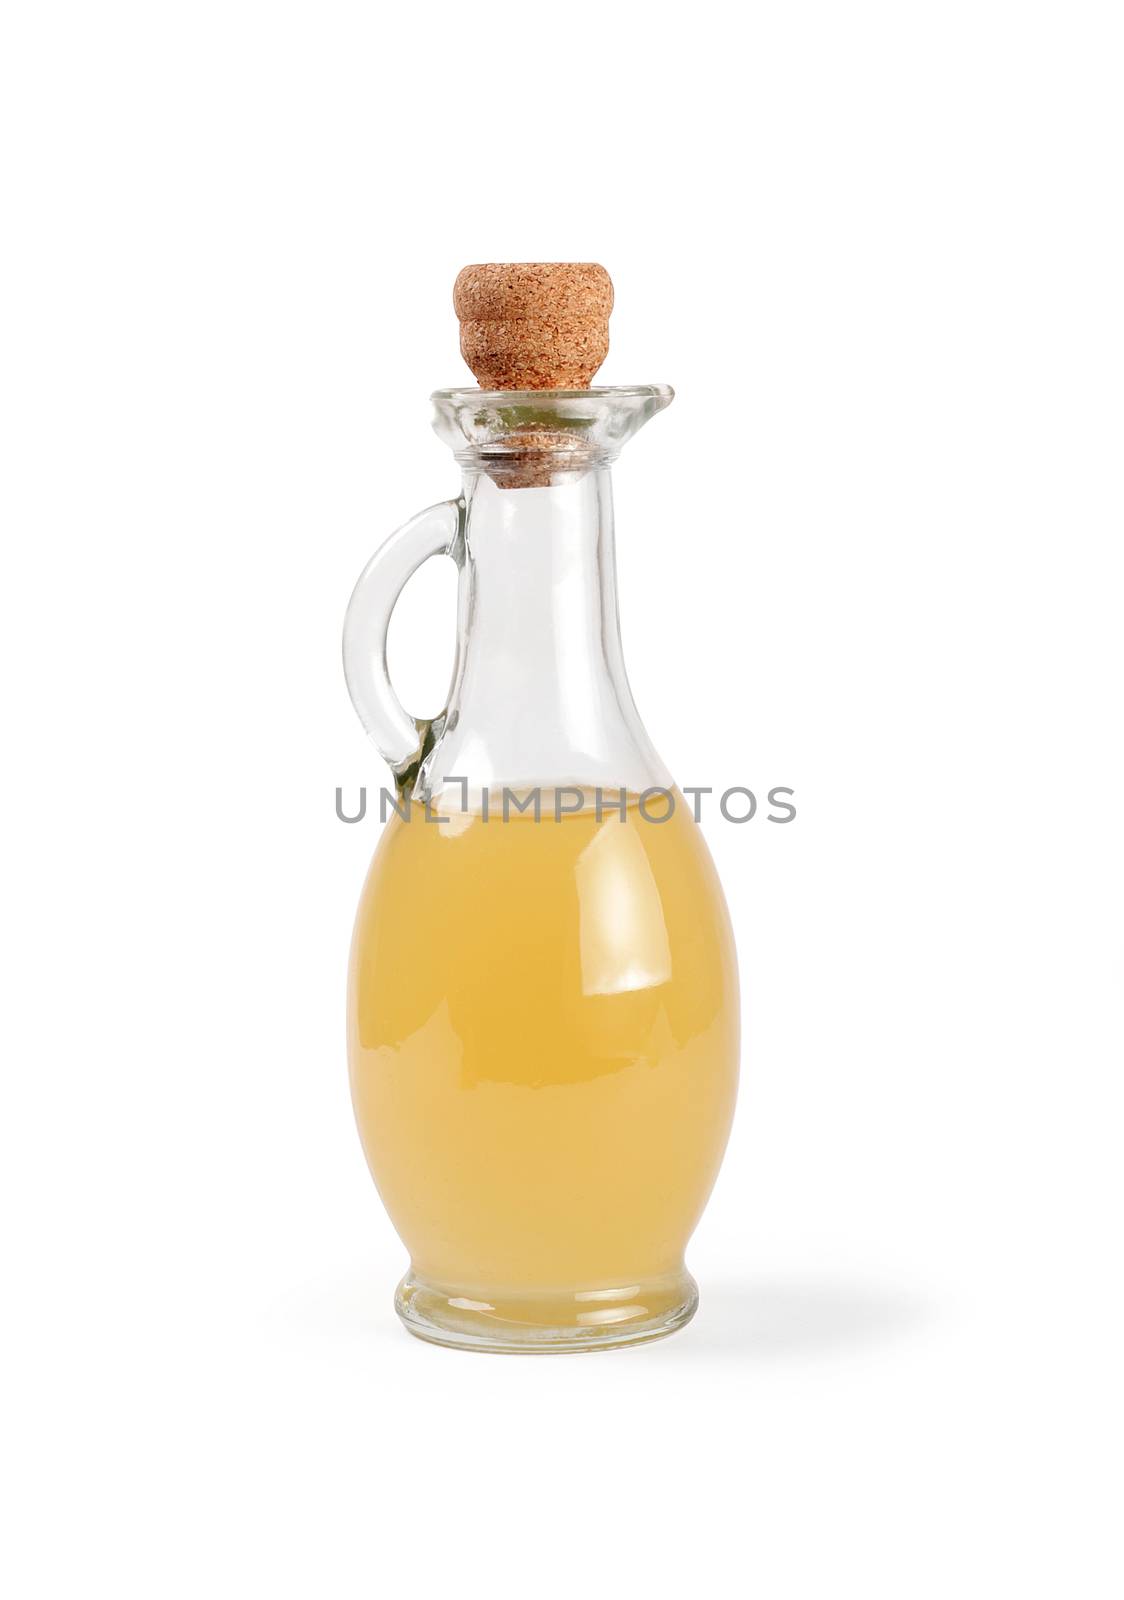 Decanter with apple vinegar isolated on the white background